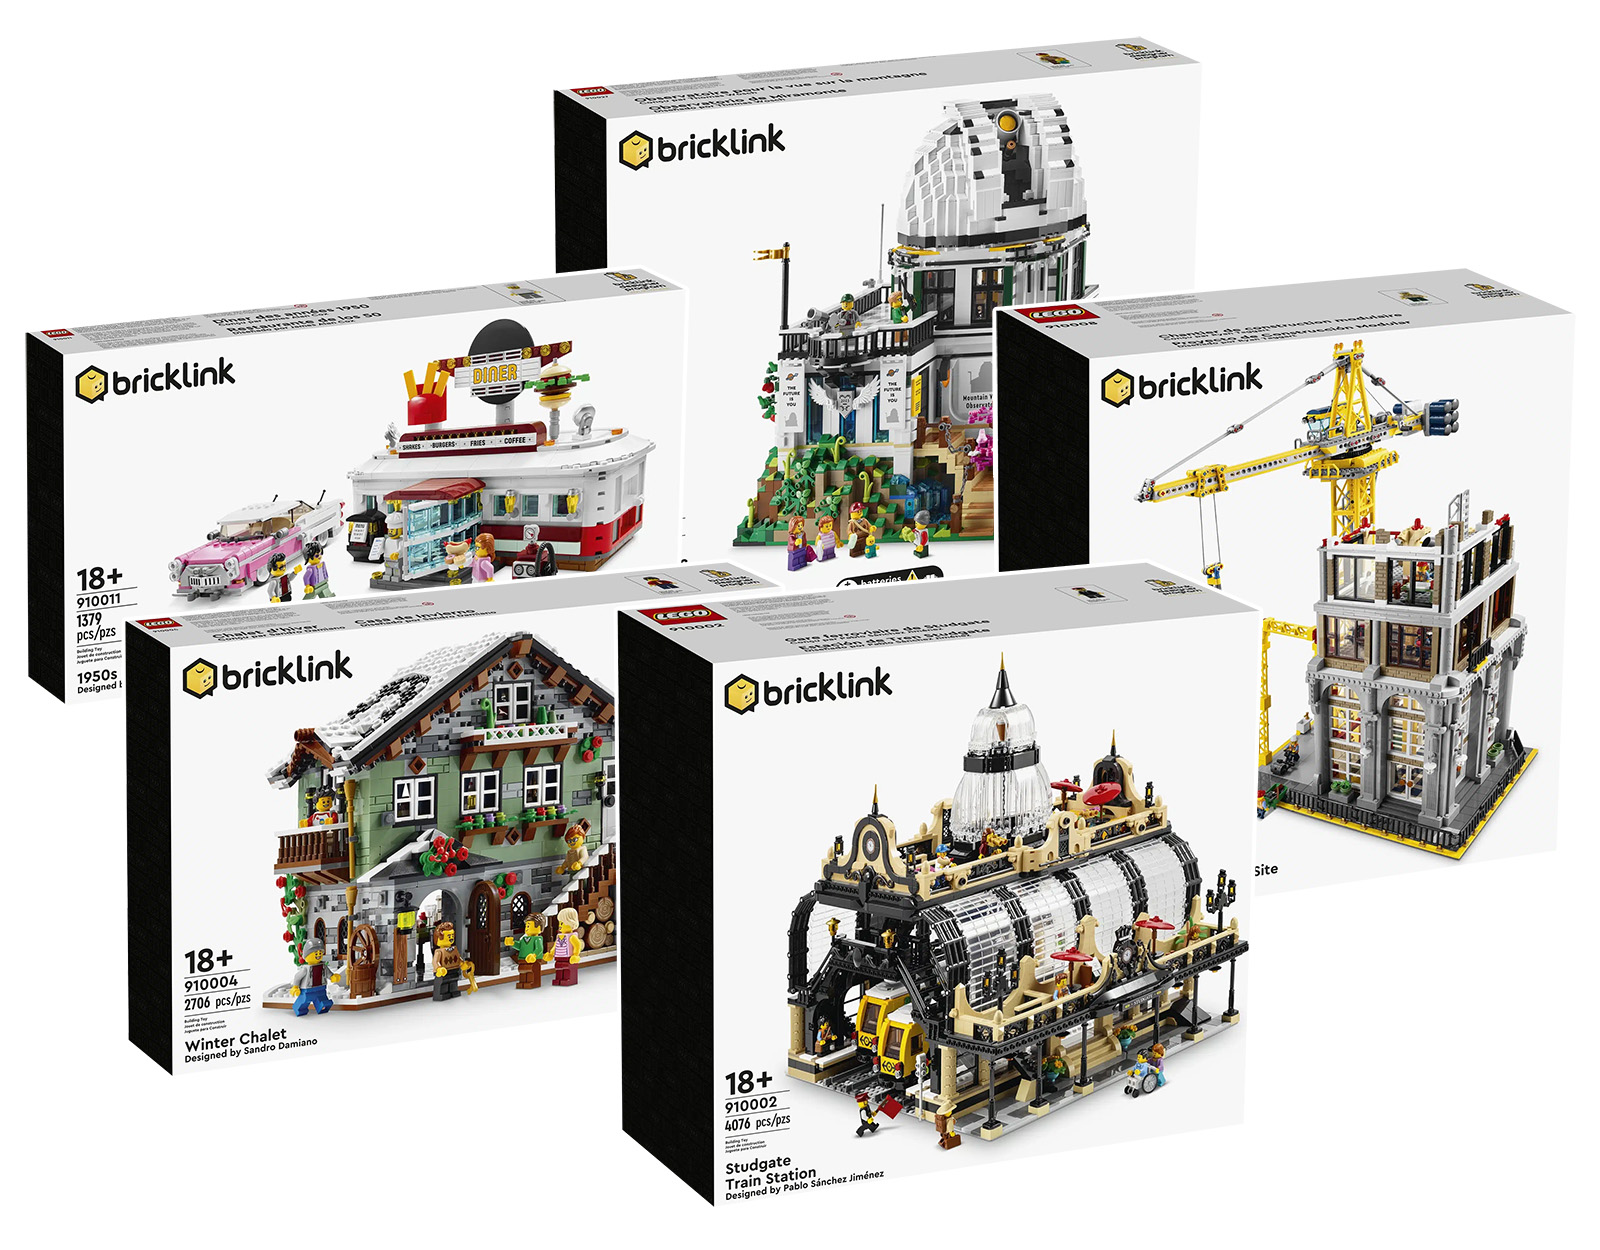 Bricklink Designer Program: the official visuals of the sets from the 3rd phase of crowdfunding